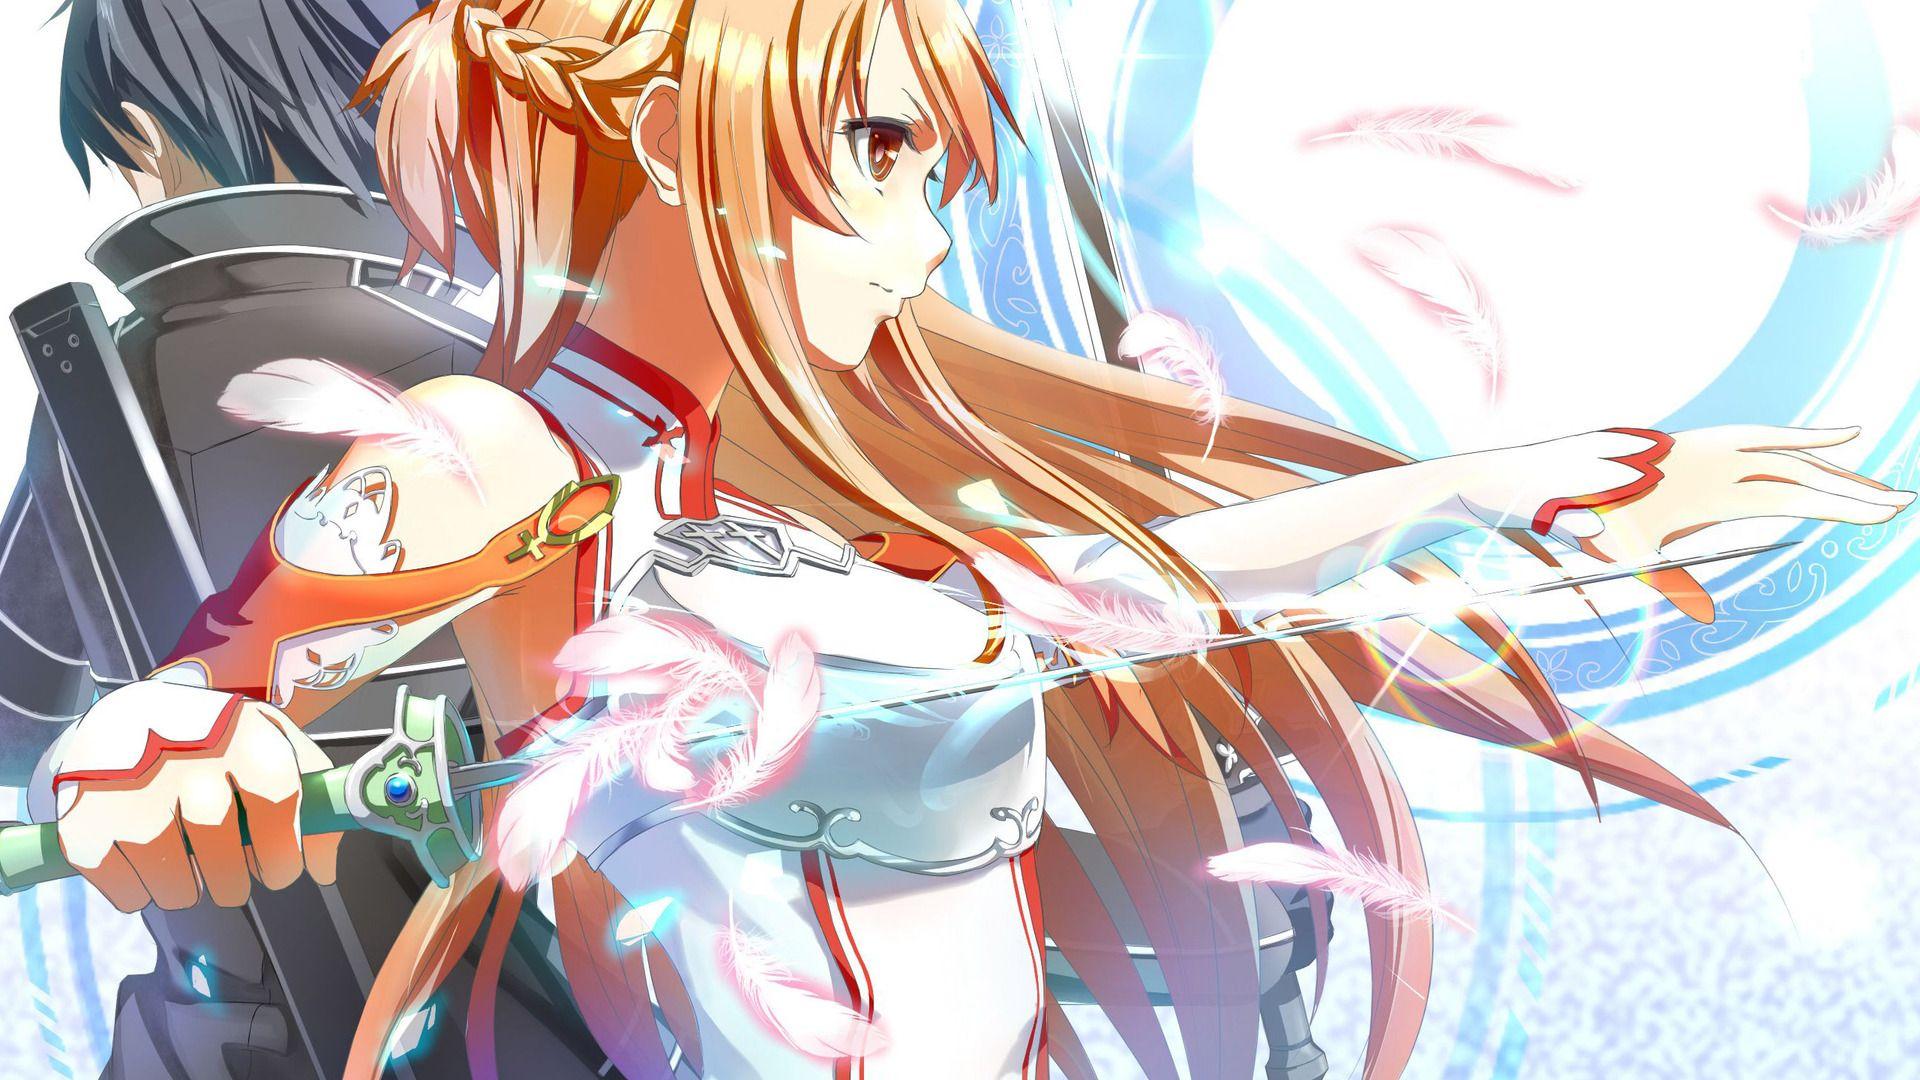 Anime Sword Wallpapers - Top Free Anime Sword Backgrounds - WallpaperAccess